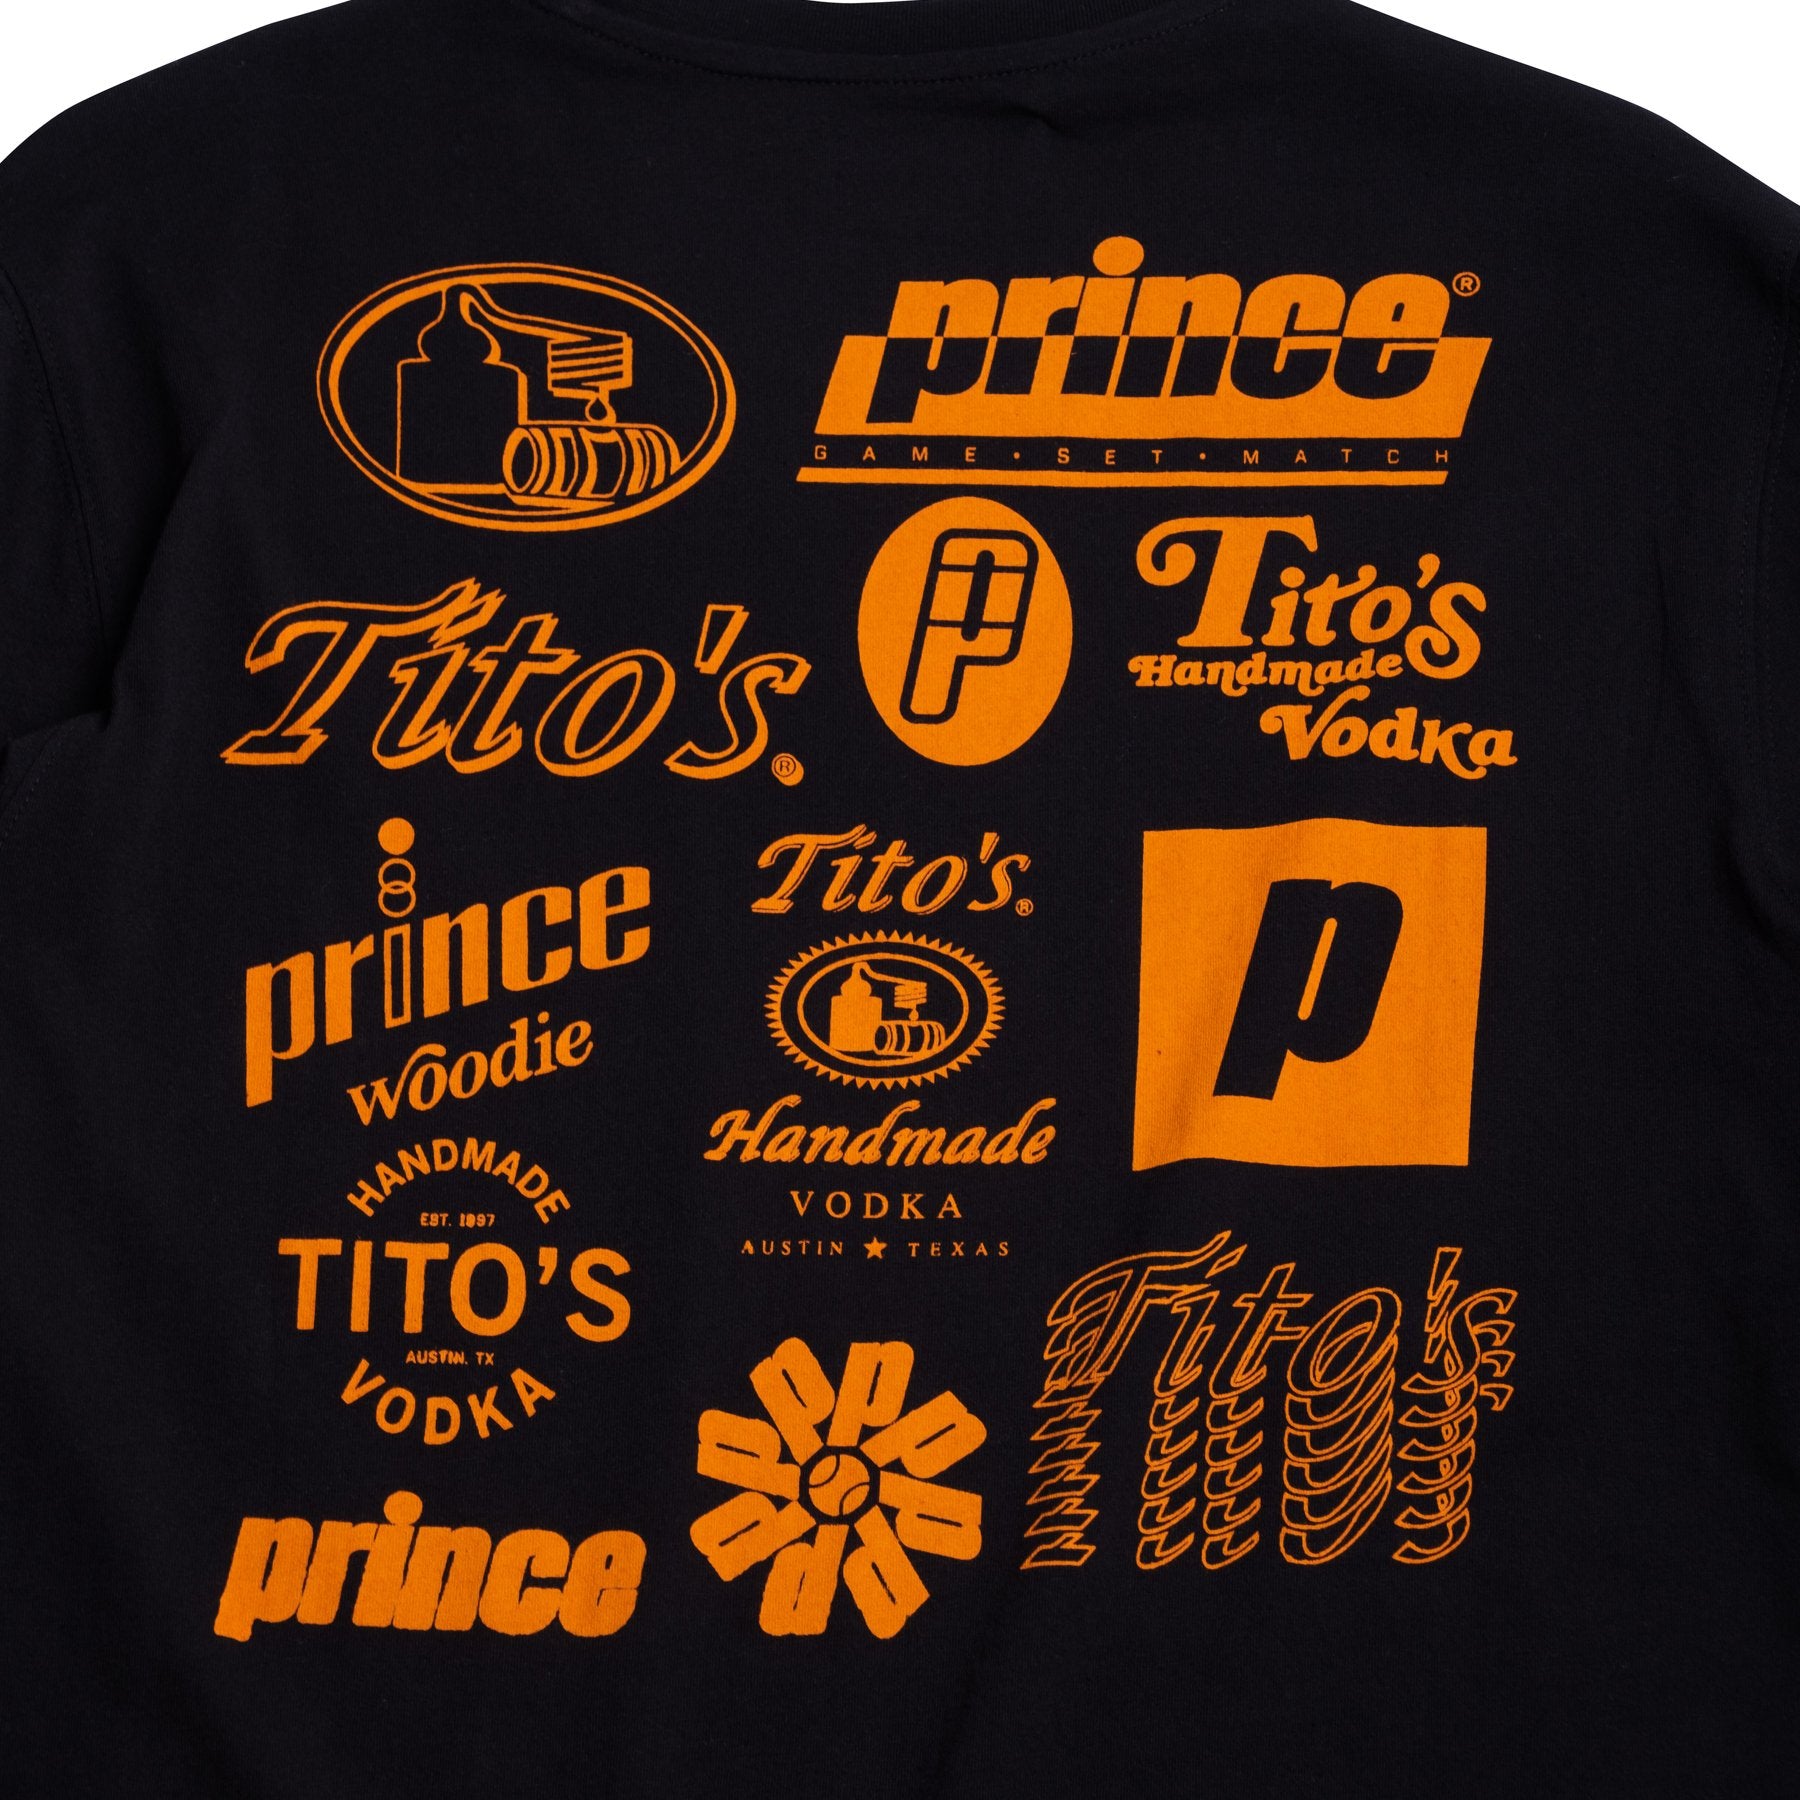 Tito's and prince logos on back in orange